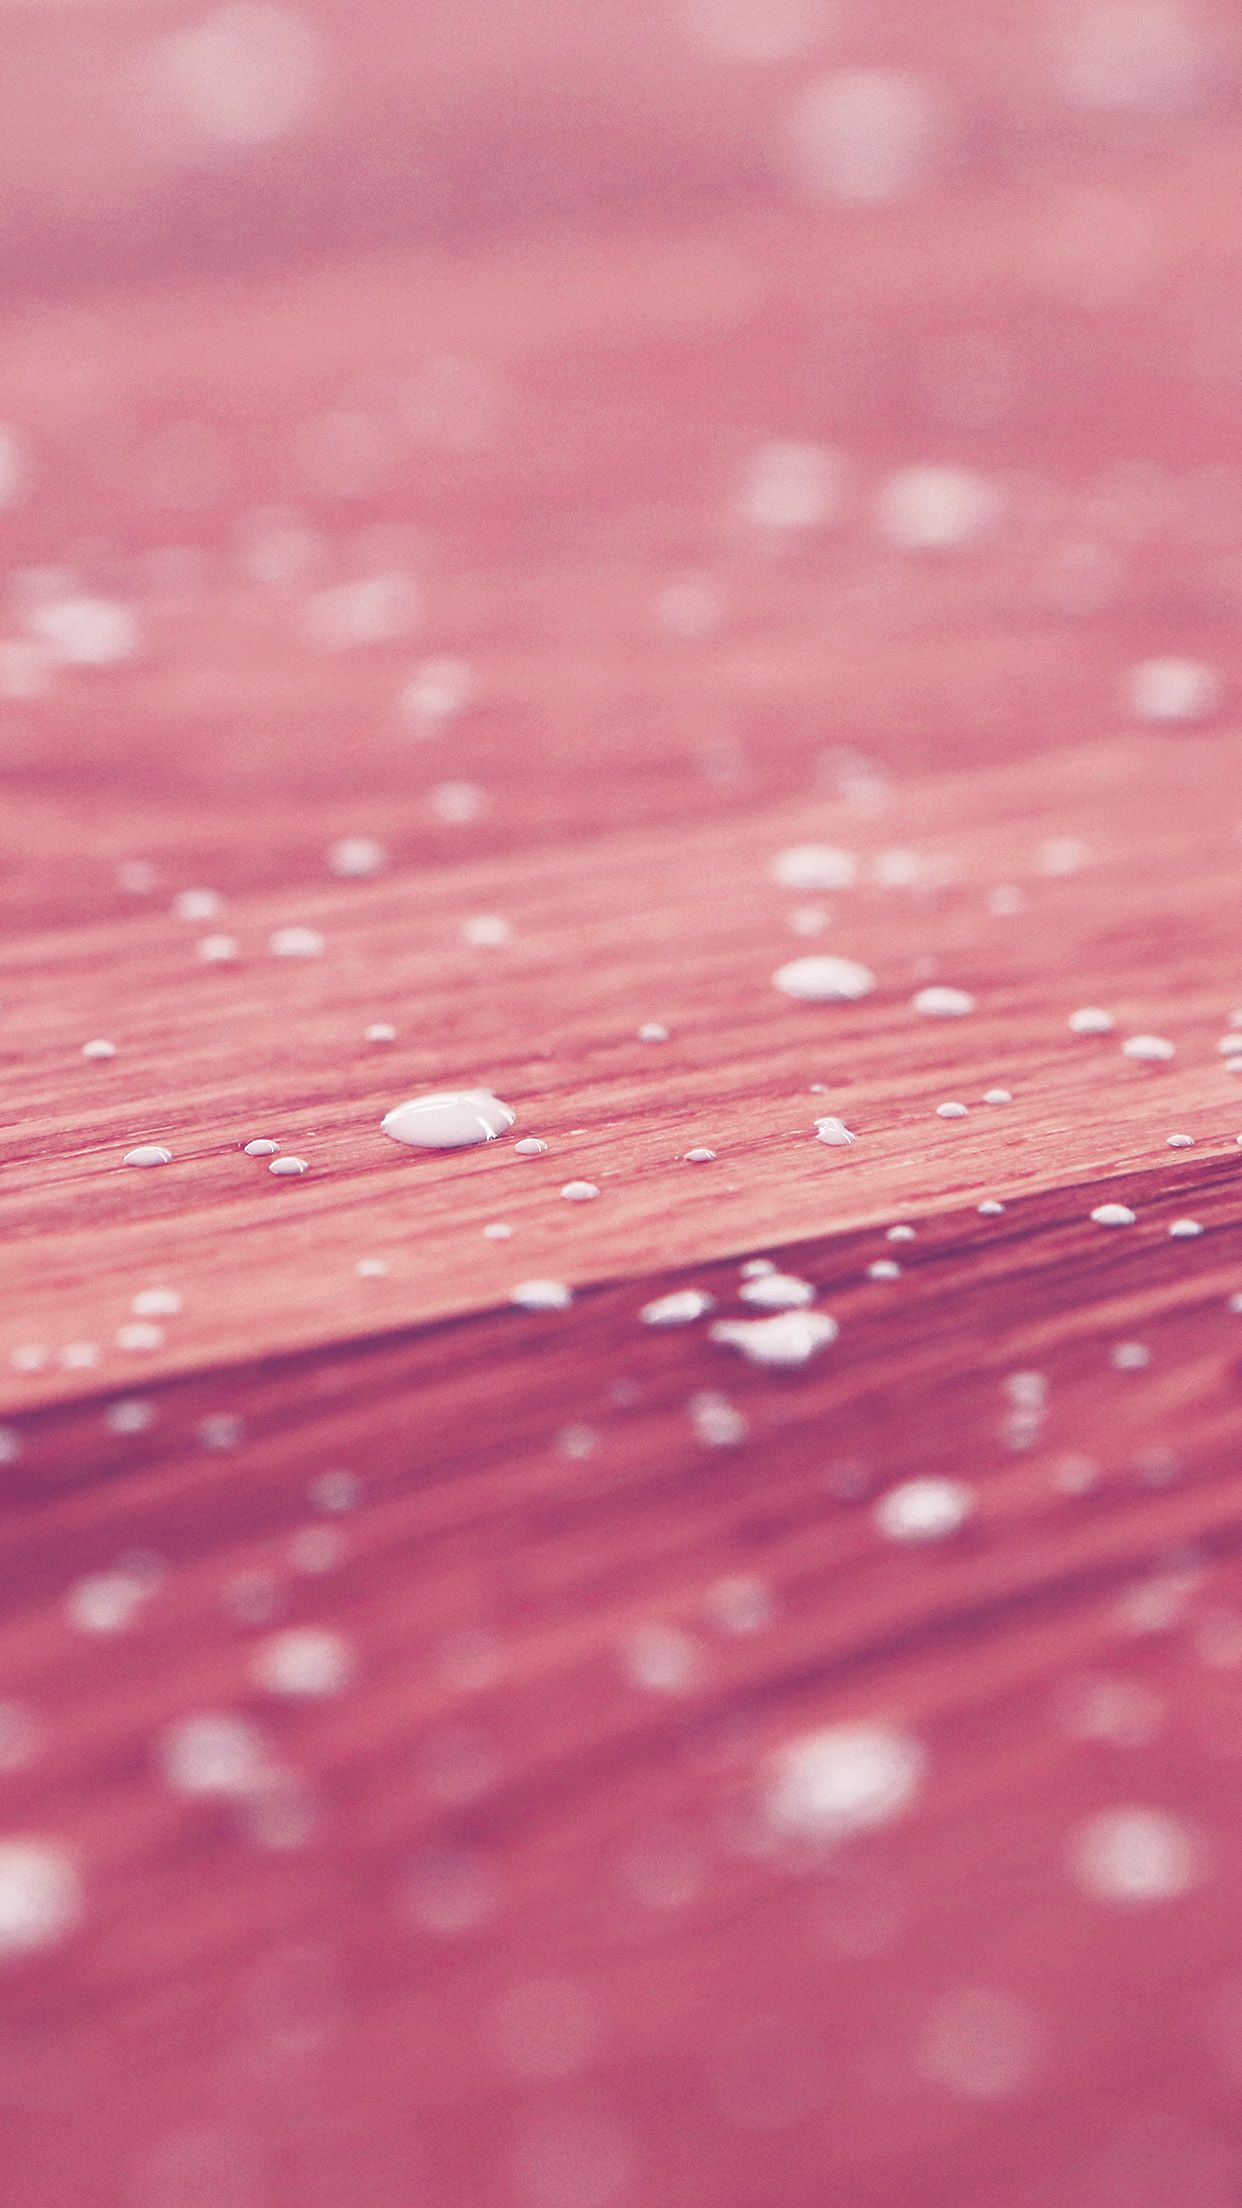 Drops Of Milk On Floor Pattern Nature Pink Red